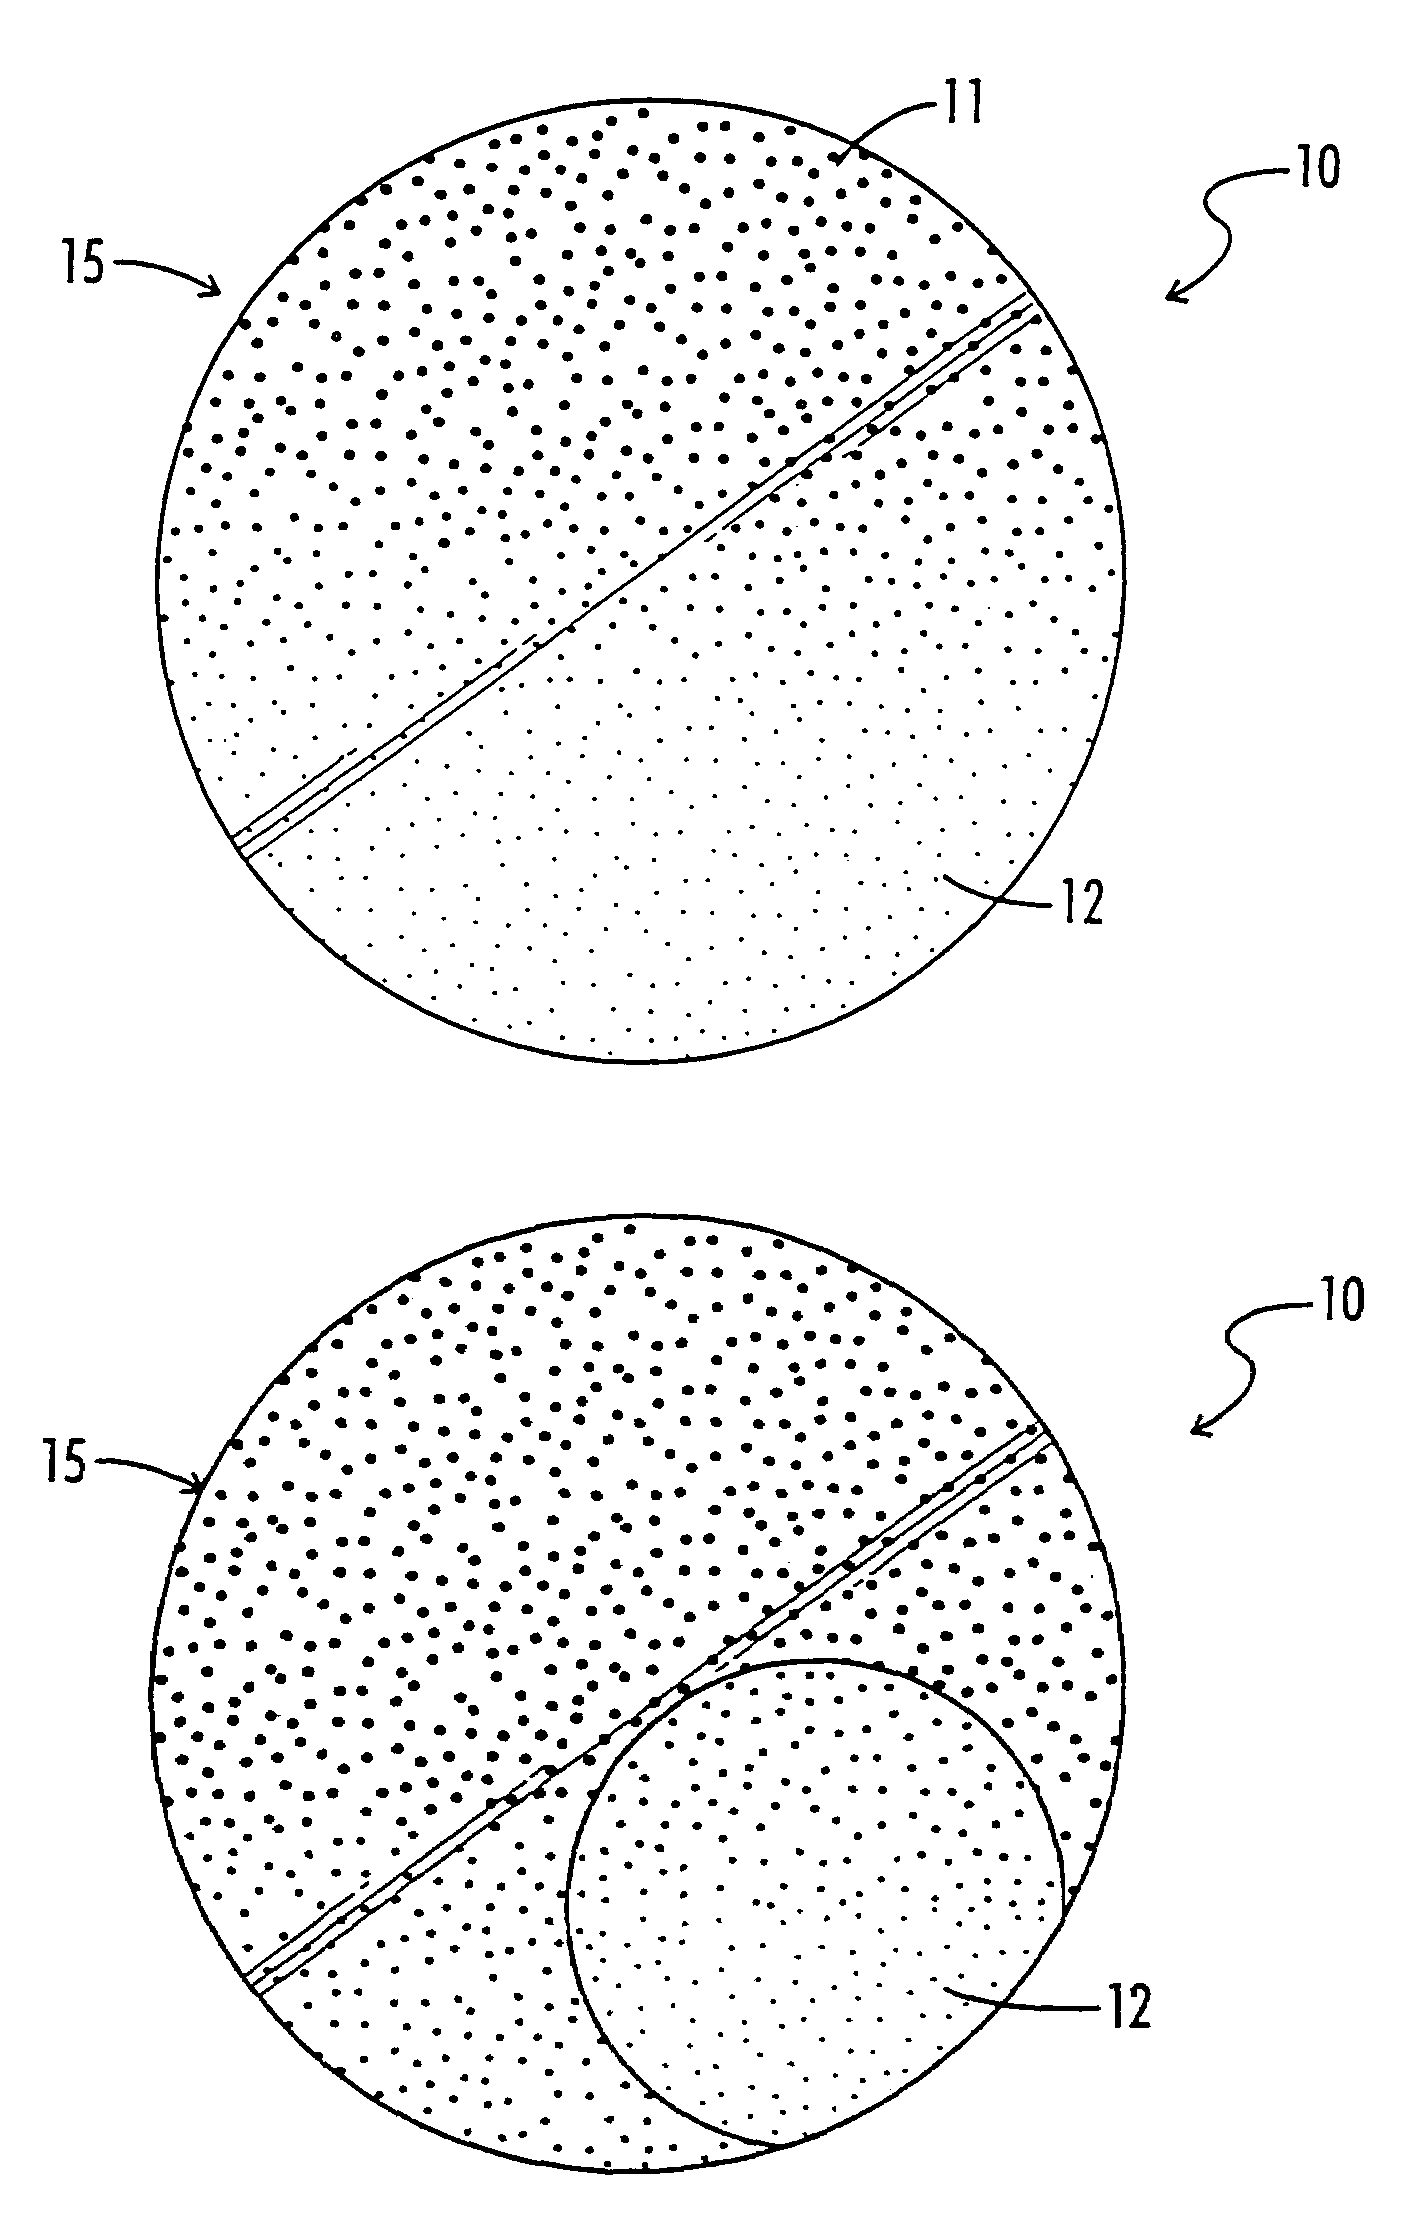 Eyeglass lens with multiple optical zones having varying optical properties for enhanced visualization of different scenes in outdoor recreational activities